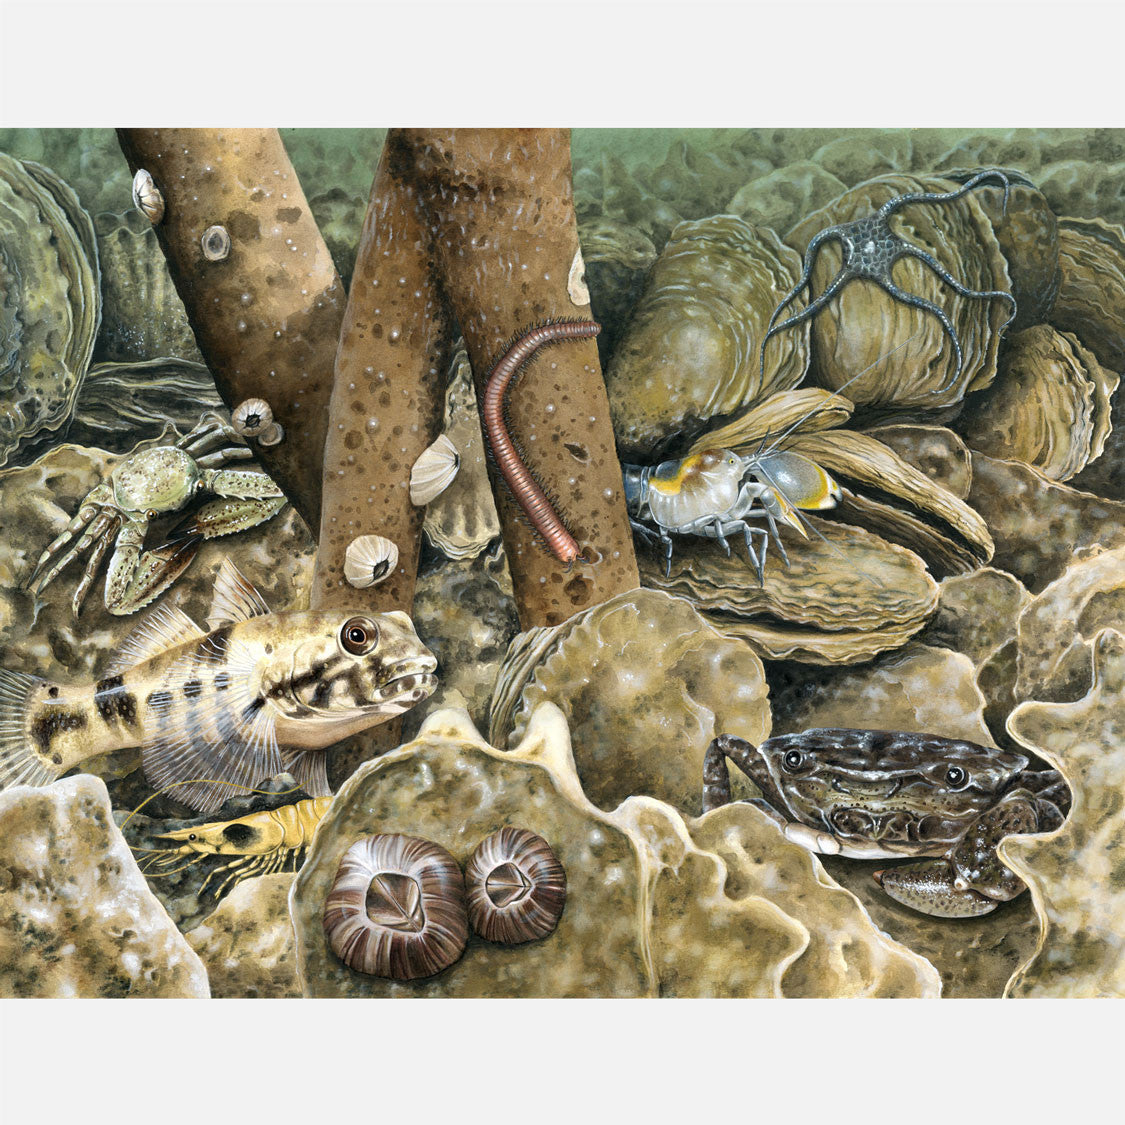 This beautiful, highly detailed and accurate illustration is of an oyster reef from a crab's eye view. 